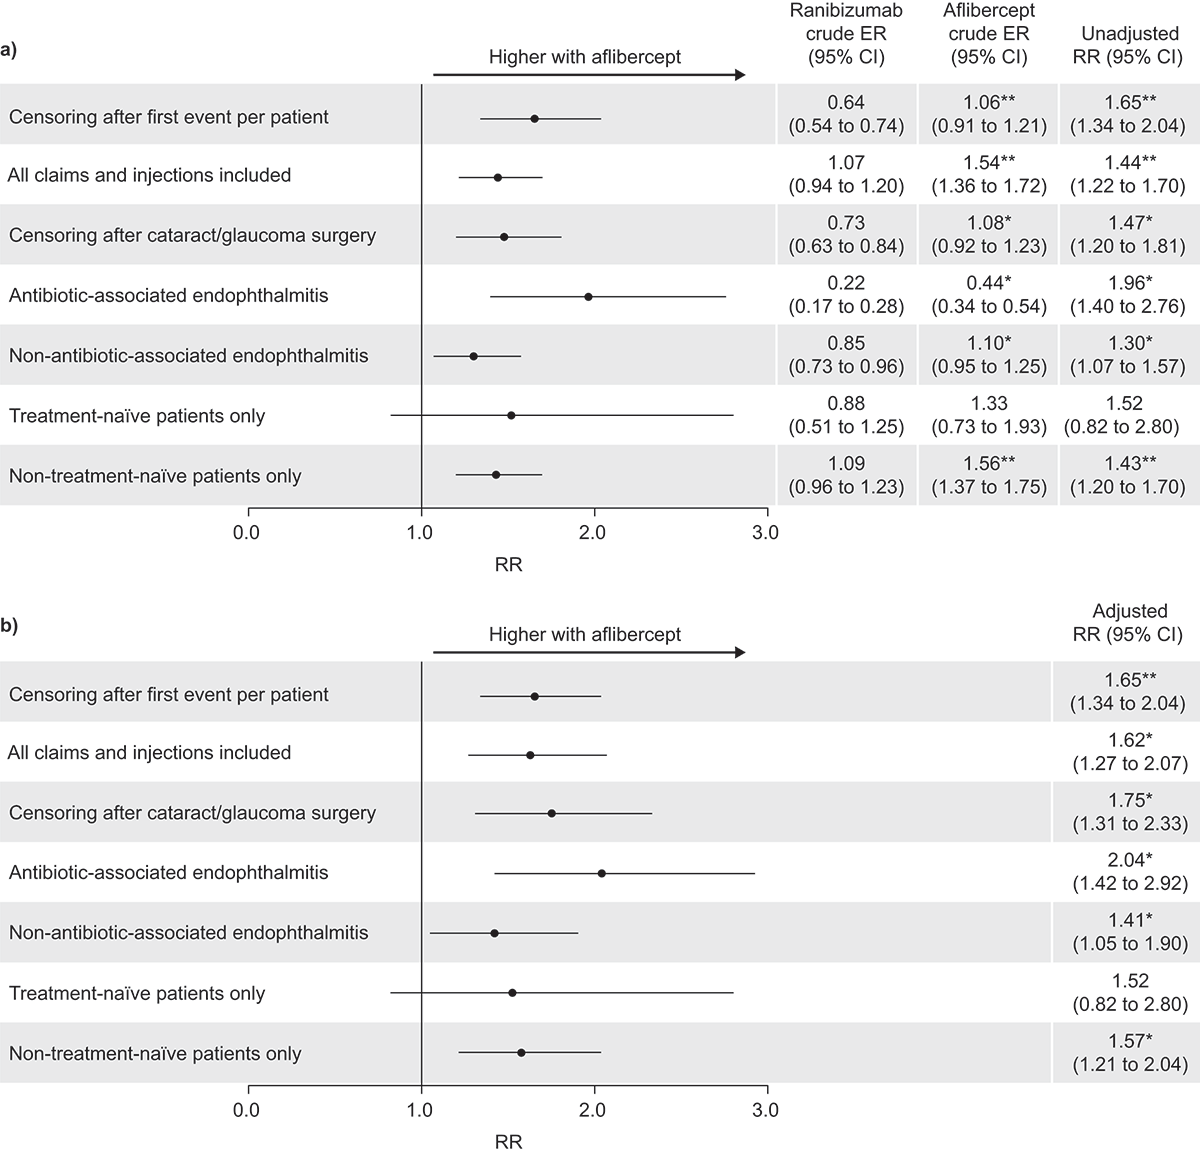 Figure 2. Relative risk (RR) of endophthalmitis with aflibercept injections relative to ranibizumab injections in the US; (a) unadjusted, and (b) adjusted results. CI, confidence interval; ER, event rate. Unadjusted results were calculated by Poisson regression. Adjusted results were calculated using the generalized estimating equation model with compound symmetry adjustments; adjustments were made for both injection-level (left/right injection eye, number of prior injections and occurrence of events with prior injections) and patient-level characteristics (age, sex, health plan type and geographical location). *p < 0.05; **p < 0.0001 (χCitation2 test).